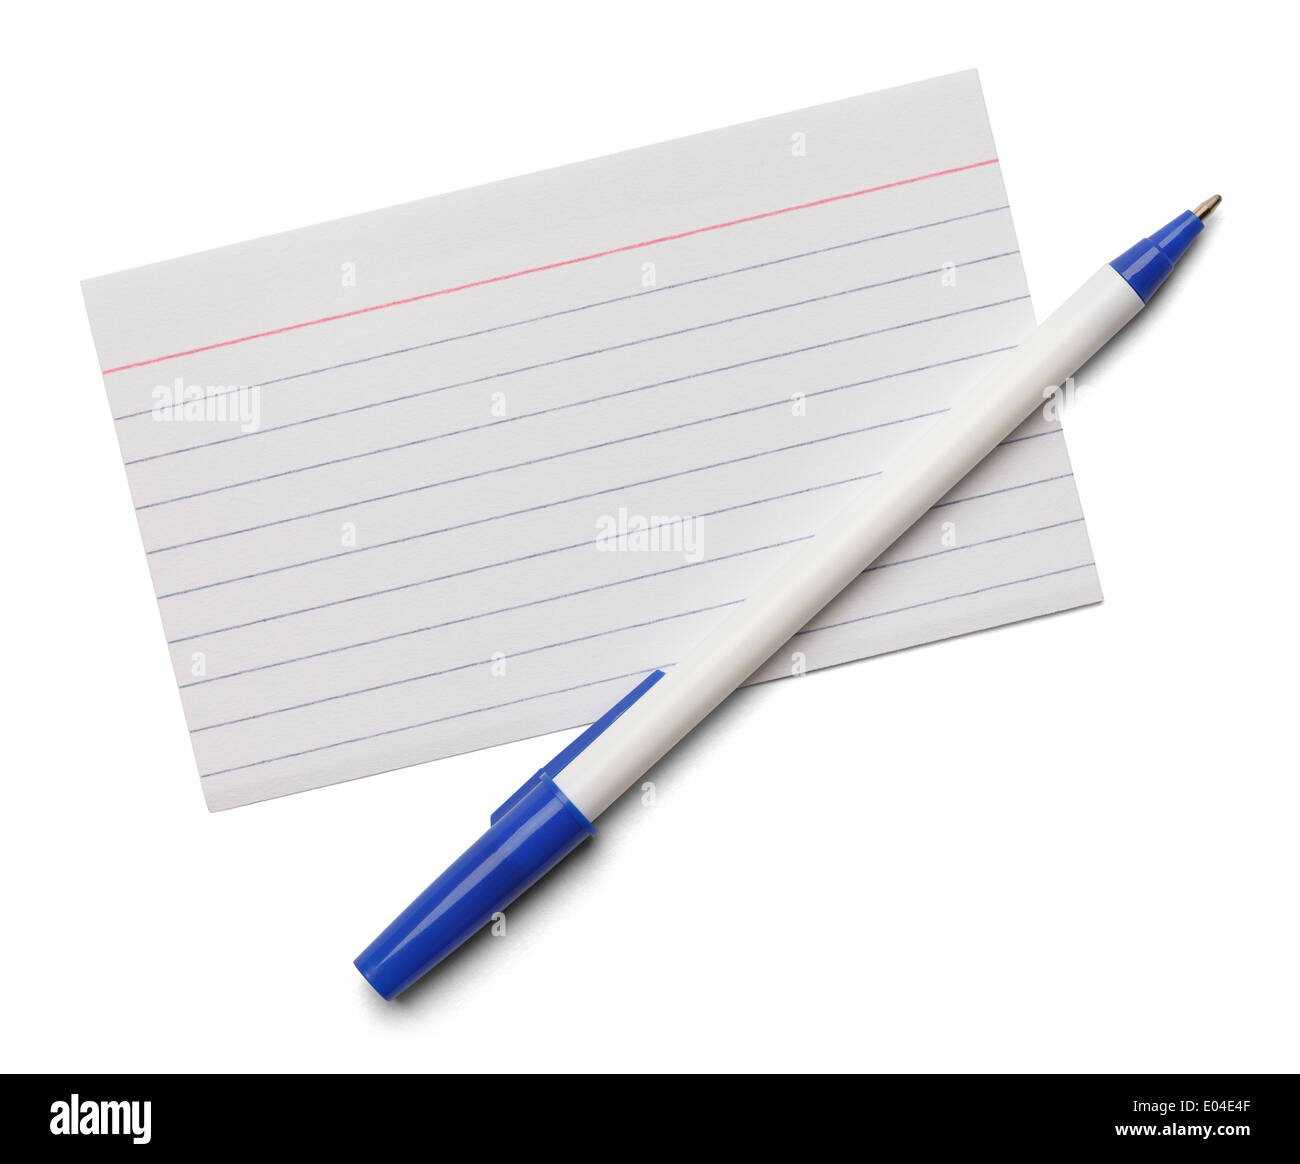 Blank note index card with blue pen isolated on a white background. Stock Photo